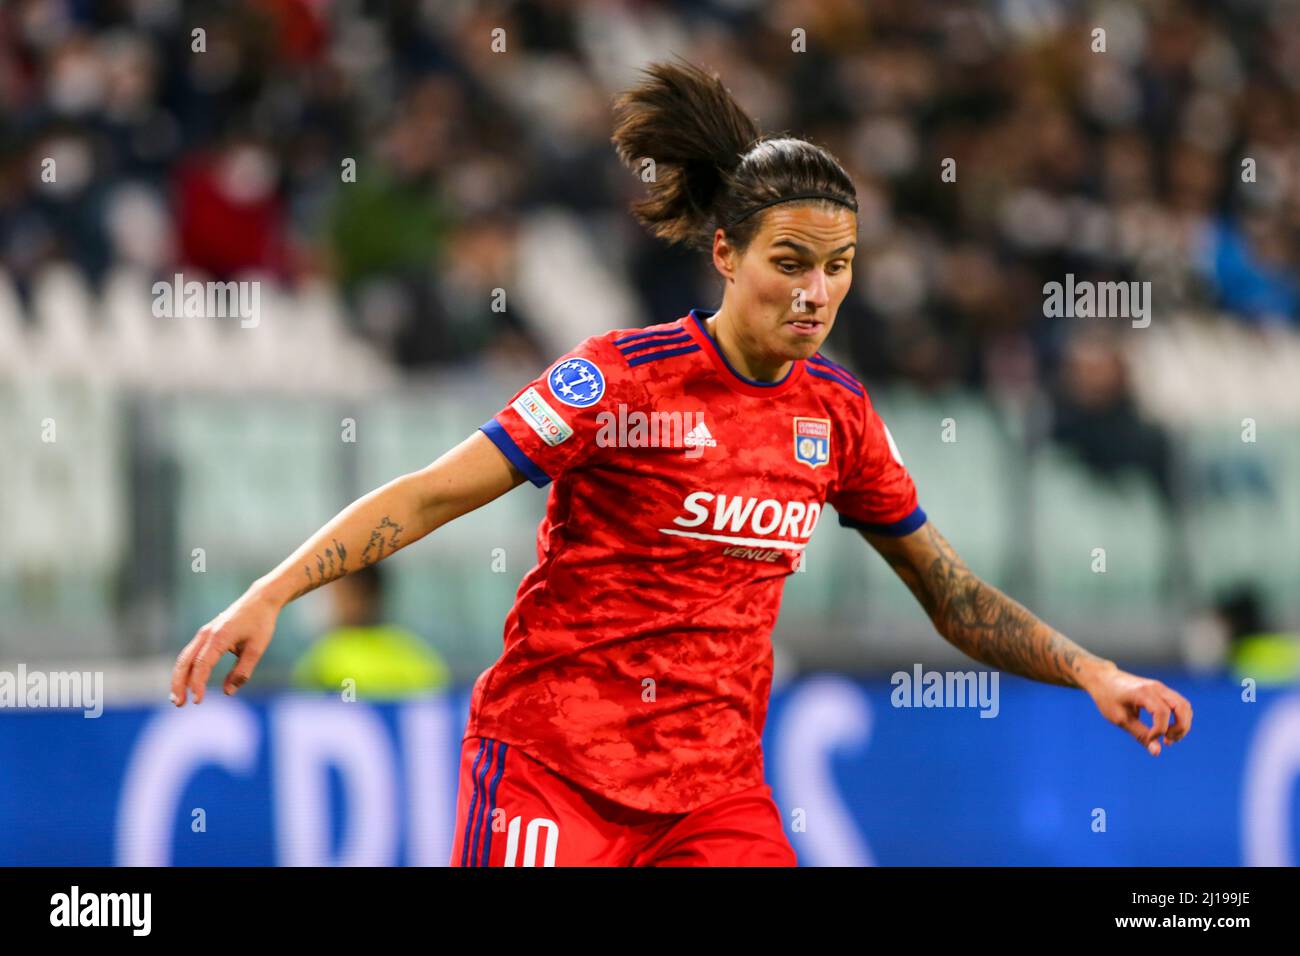 TURIN, ITALY. 23 MARCH 2022. Dzsenifer Marozsán of Olympique Lyonnais  Feminin during the quarters-final match, first leg, of the UWCL between  Juventus Women and Olympique Lyonnais Feminin on March 23, 2022 at